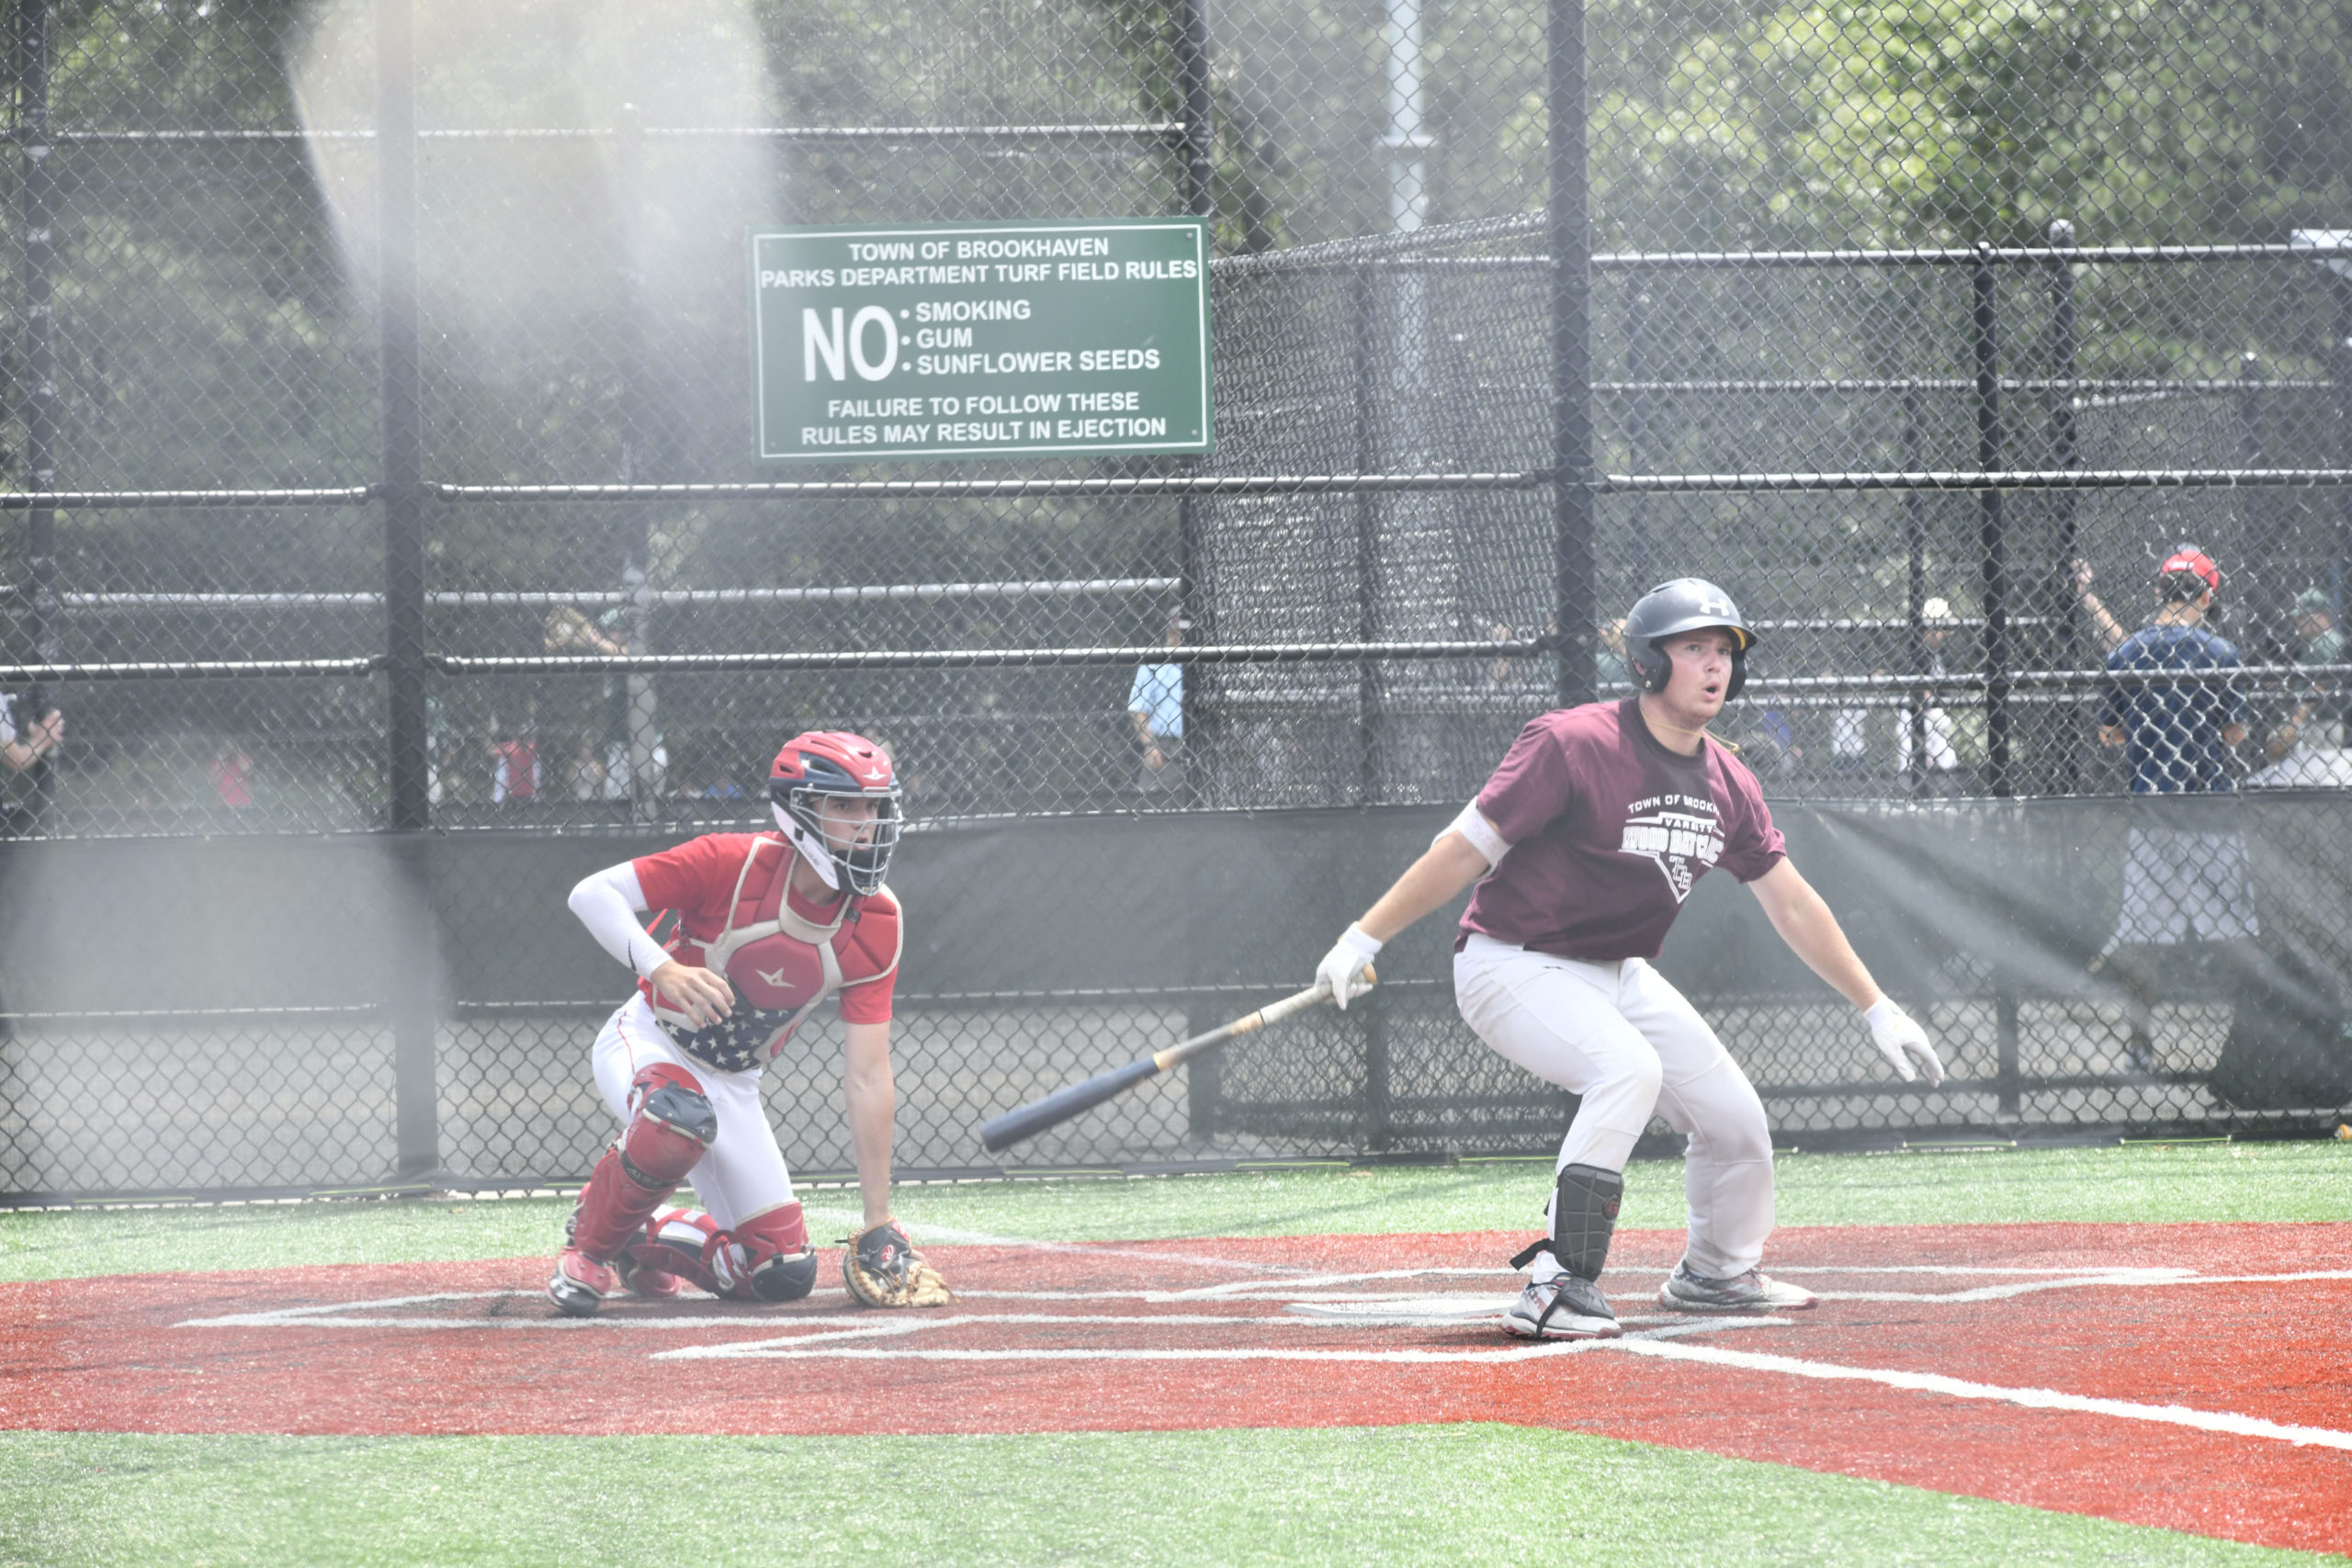 The Southampton and Pierson High School baseball teams faced off against each other in Moriches on Monday. DANA SHAW